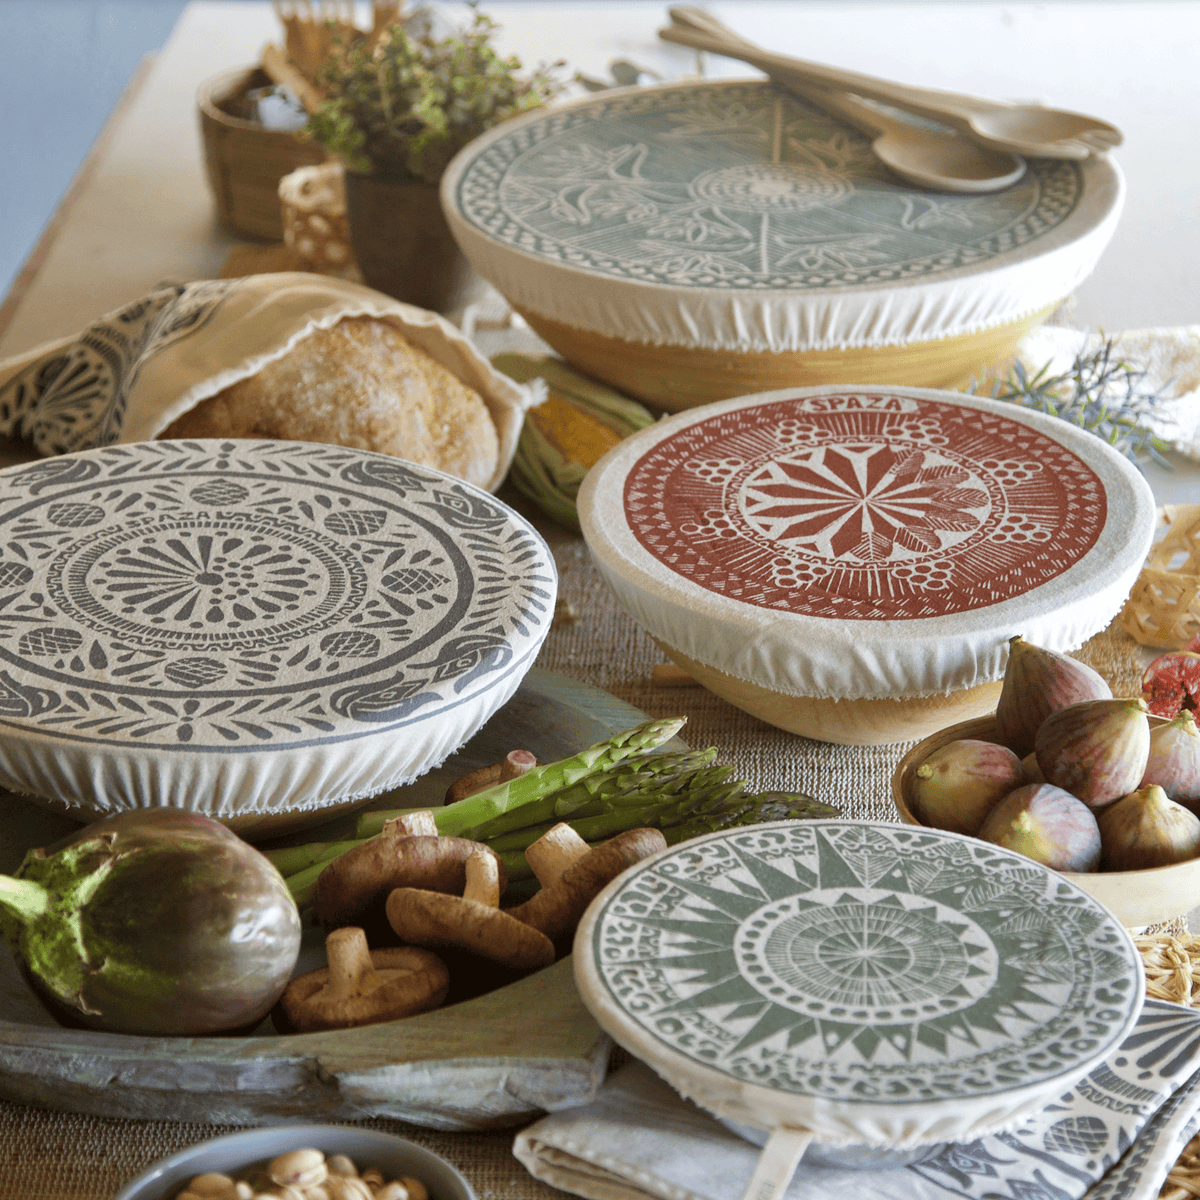 Dish and Bowl Covers – SpazaStore